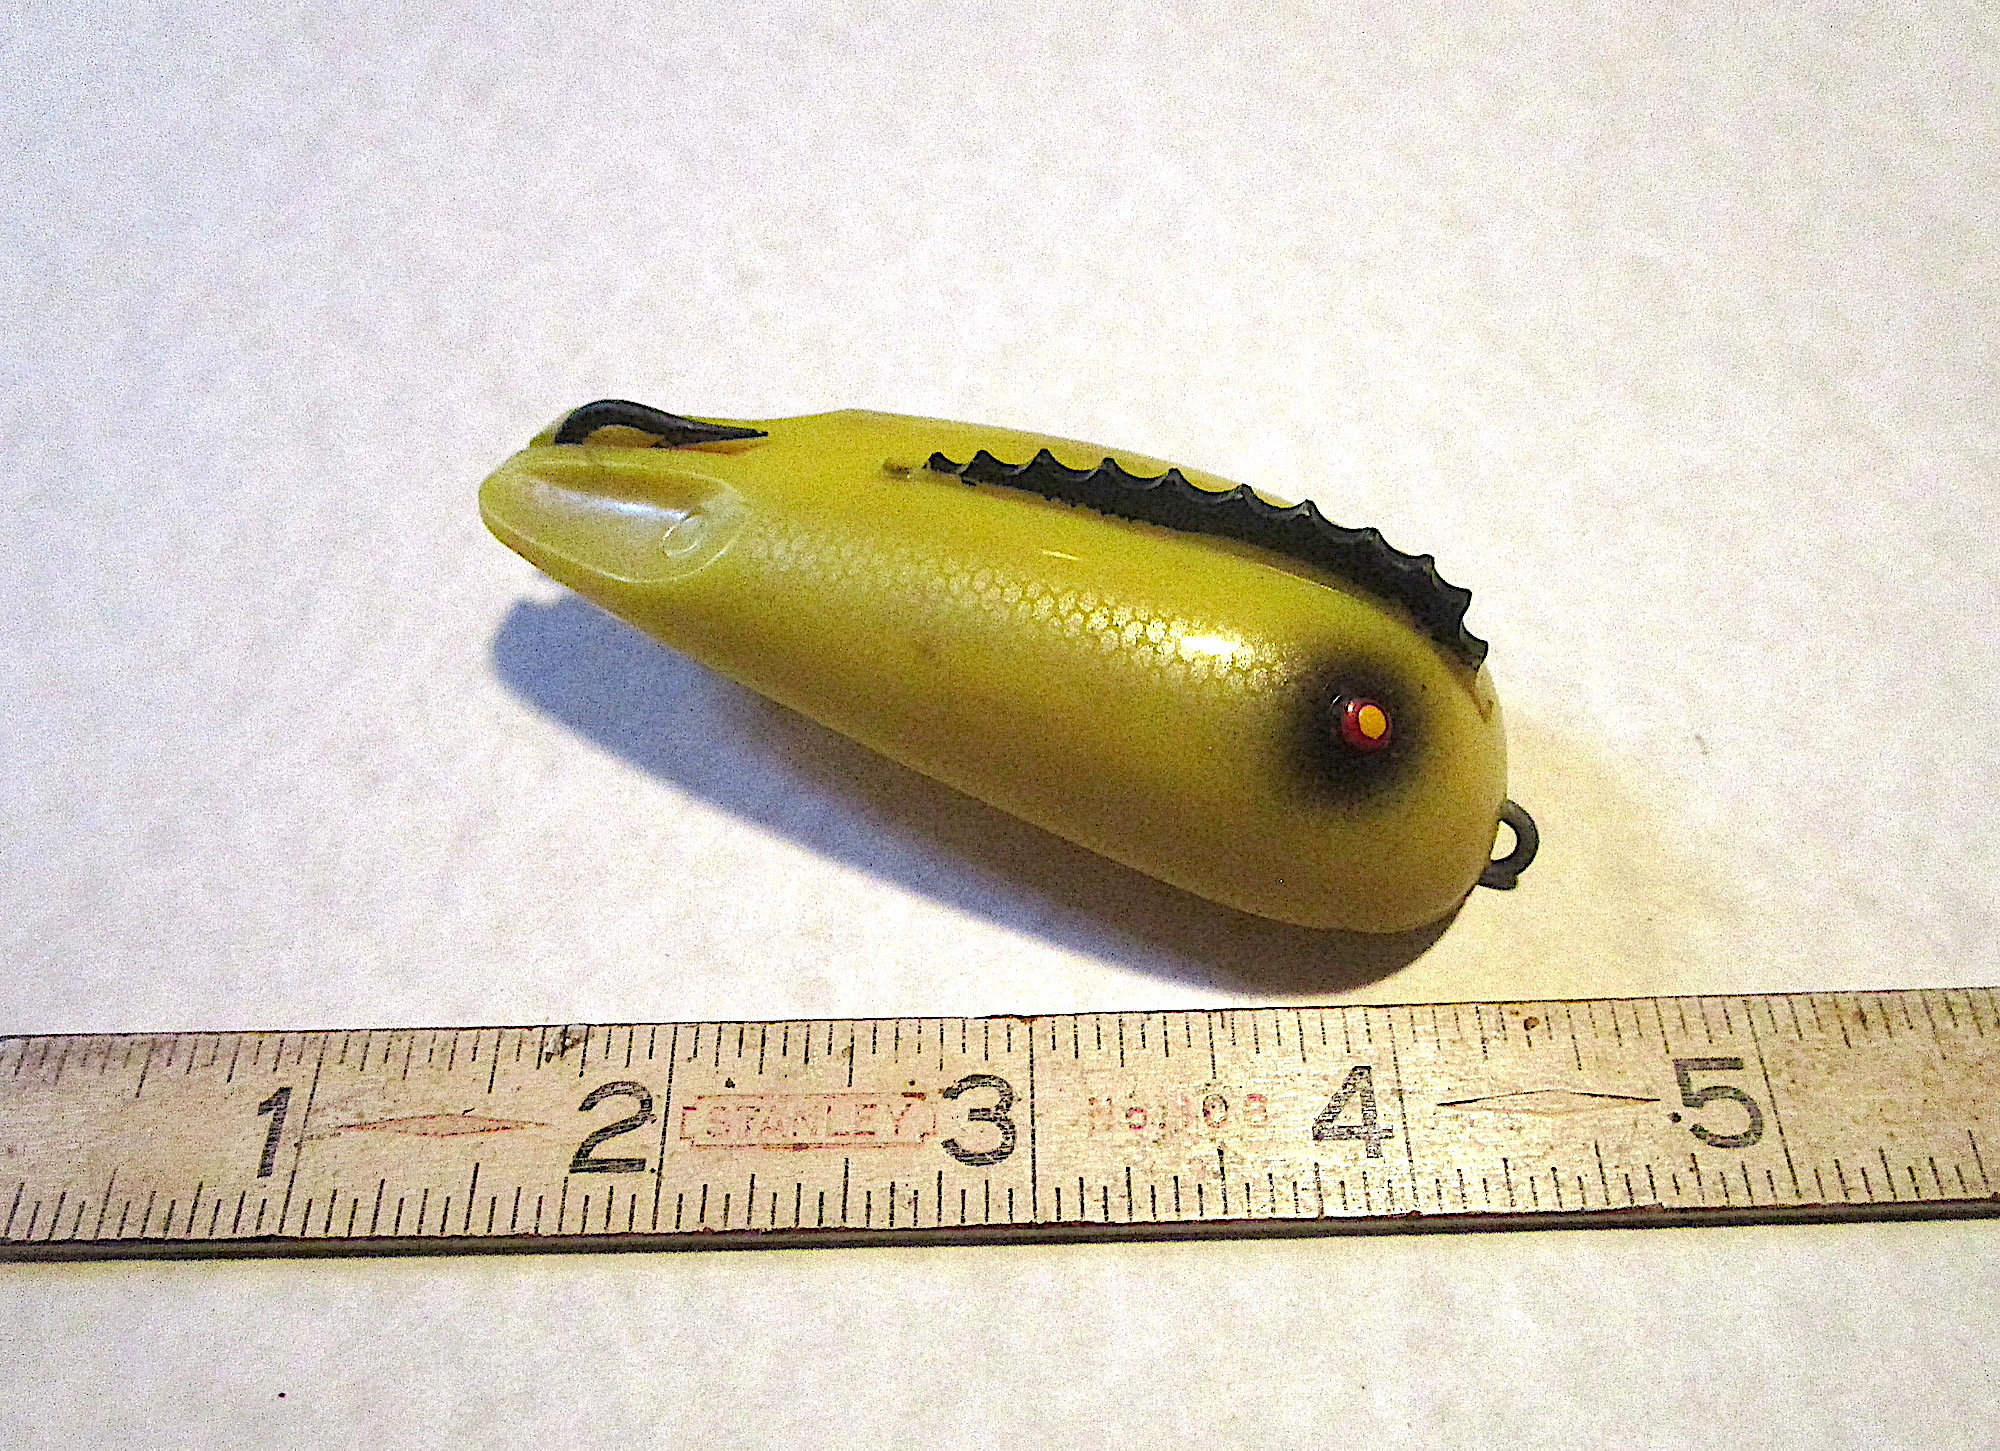 TU41 Paul Bunyan lady Bug Weedless Spring-activated Single Hook Version  Unique Vintage Old Fishing Lure Lots of Interest 